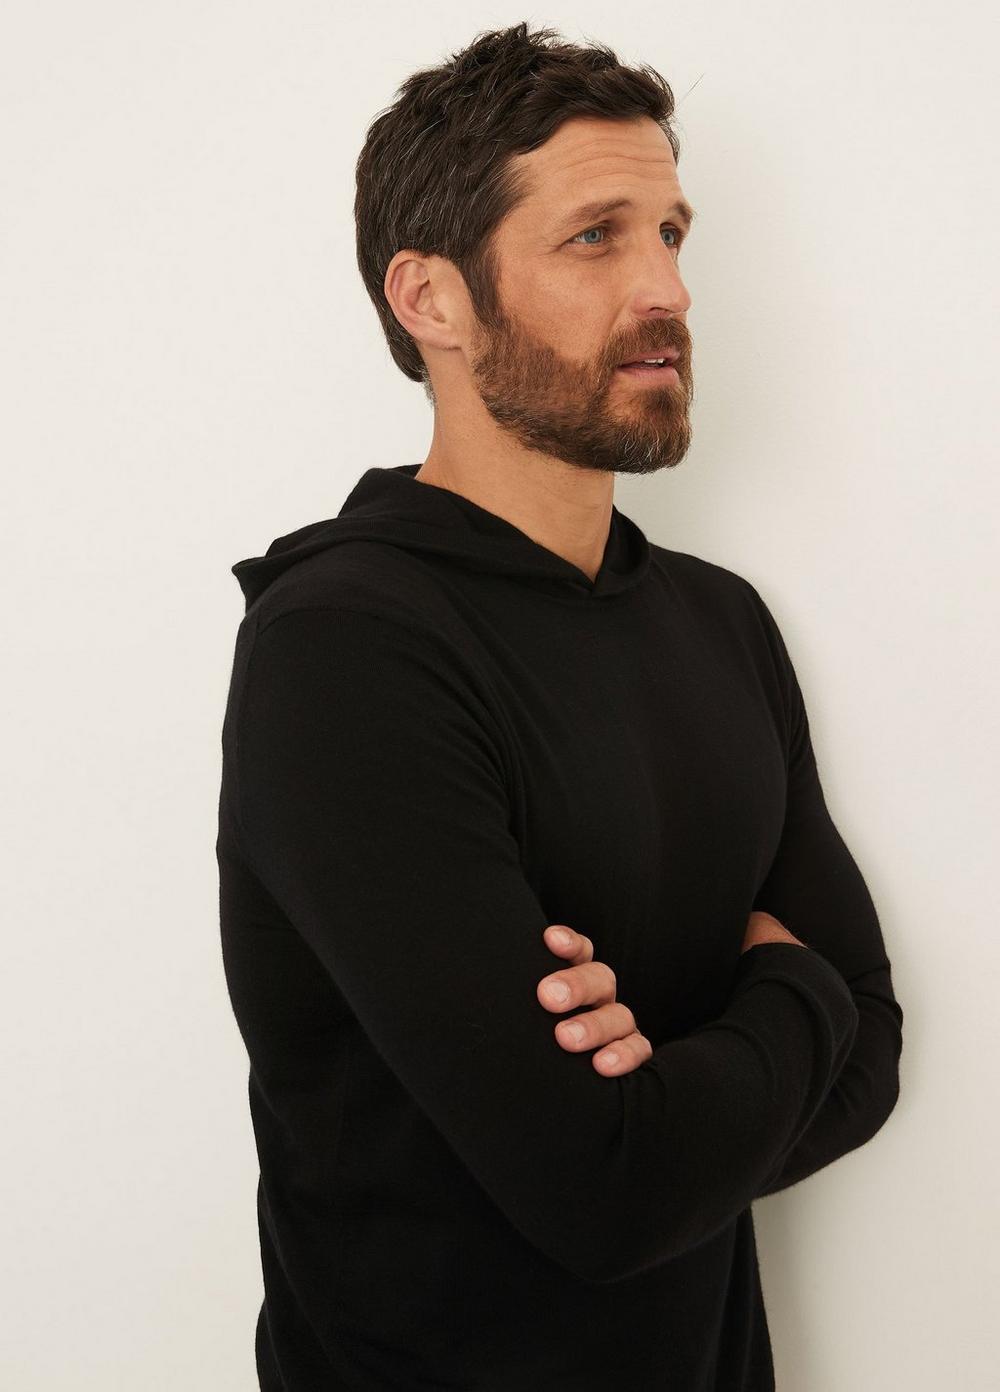 Featherweight Wool Cashmere Pullover Hoodie